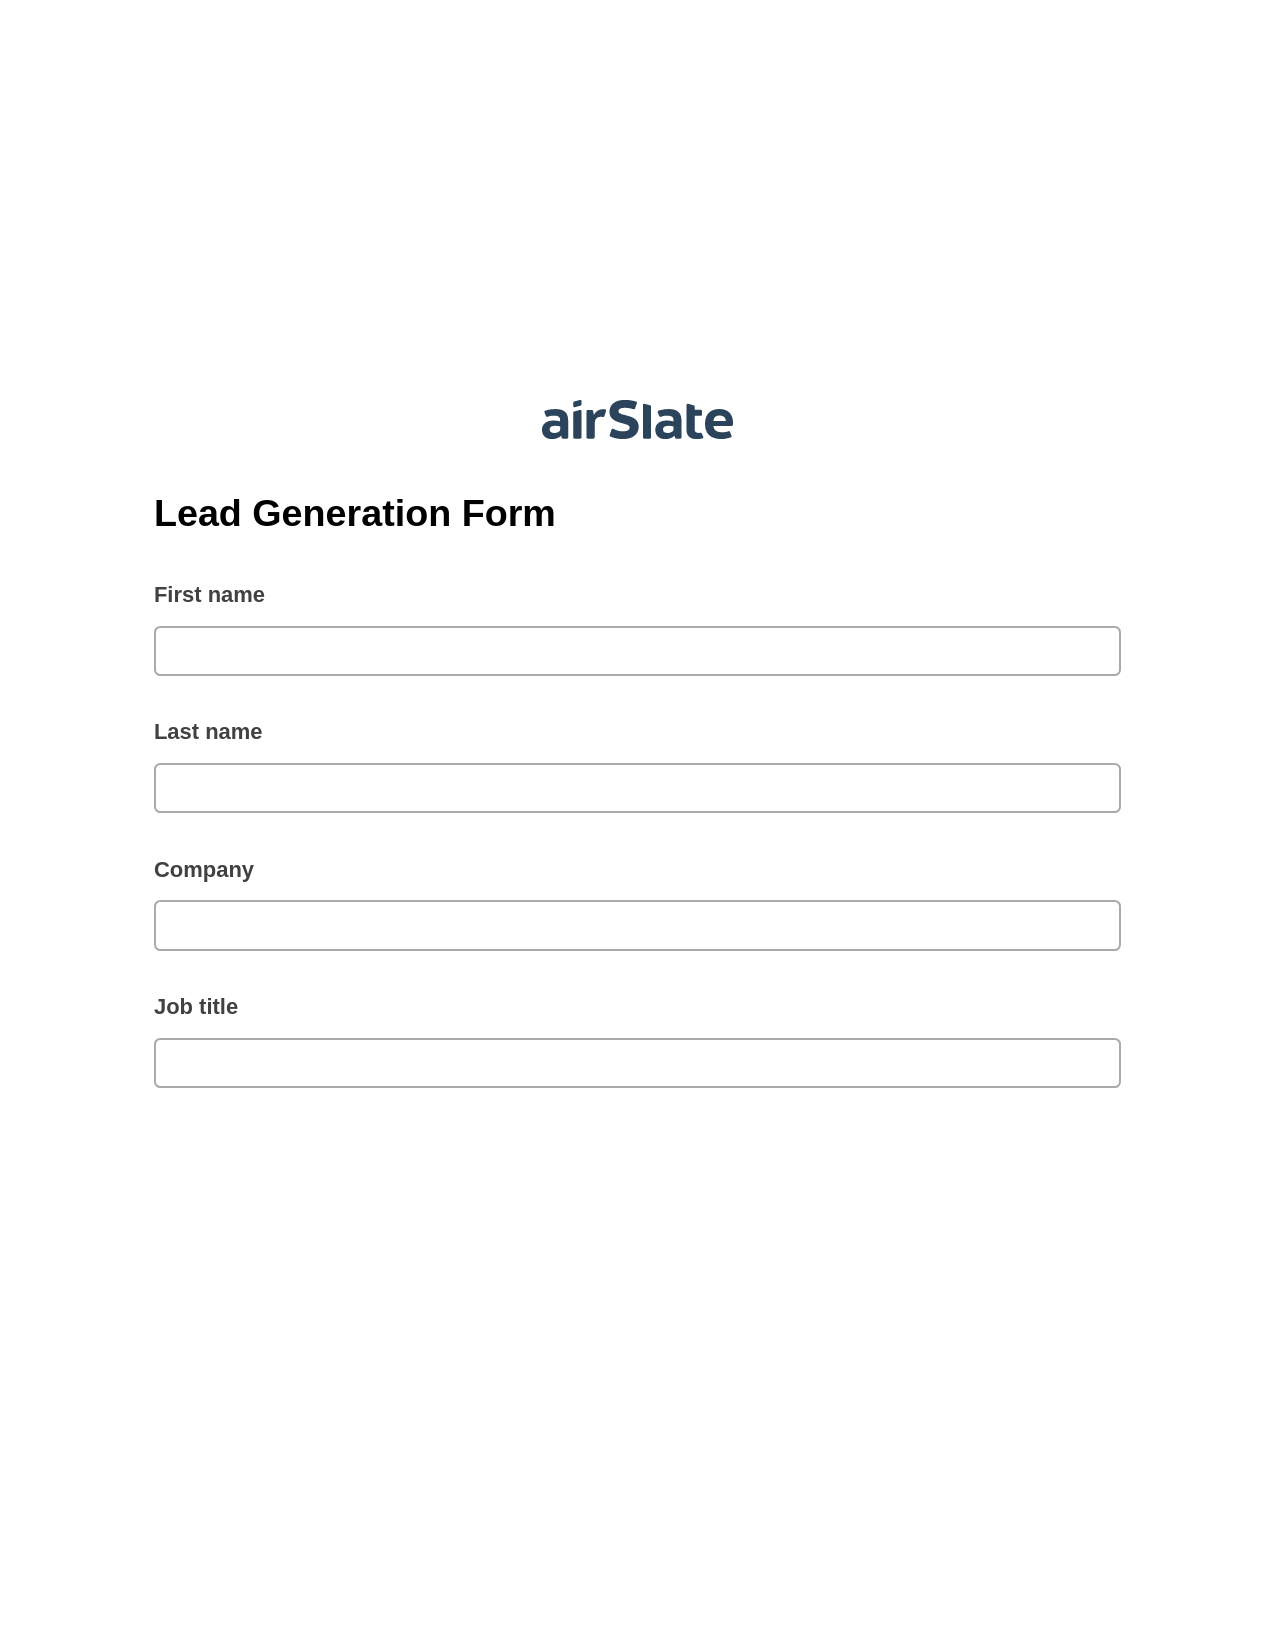 Lead Generation Form Pre-fill from MS Dynamics 365 Records, Remove Tags From Slate Bot, Export to Smartsheet